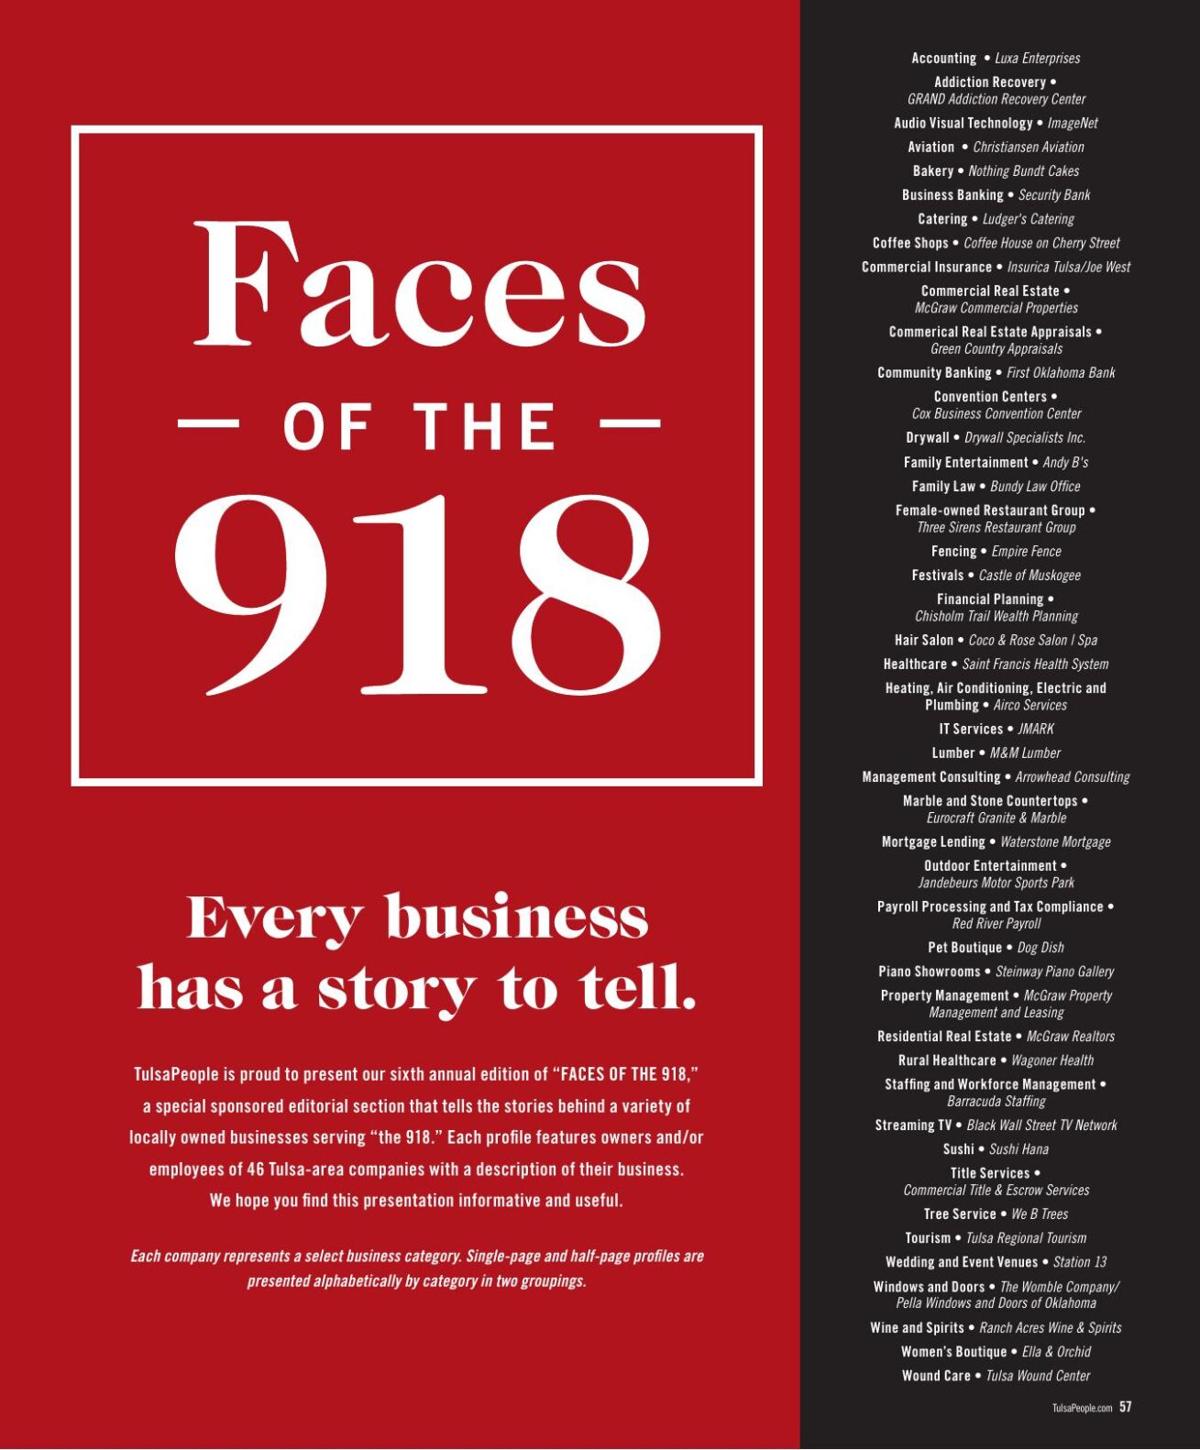 Faces of the 918